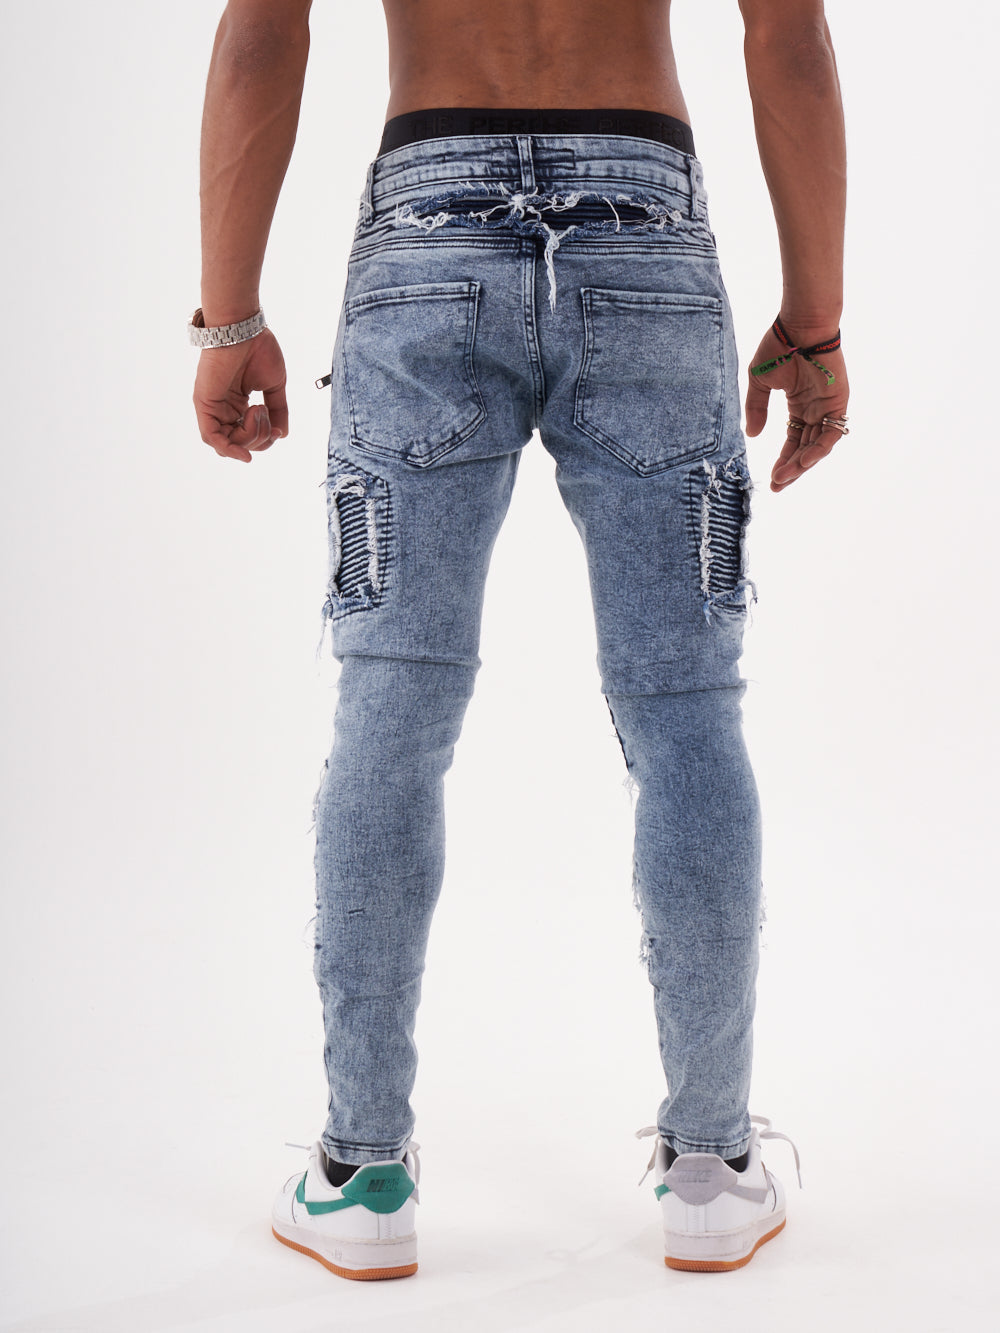 The back view of a man wearing RADICAL jeans.